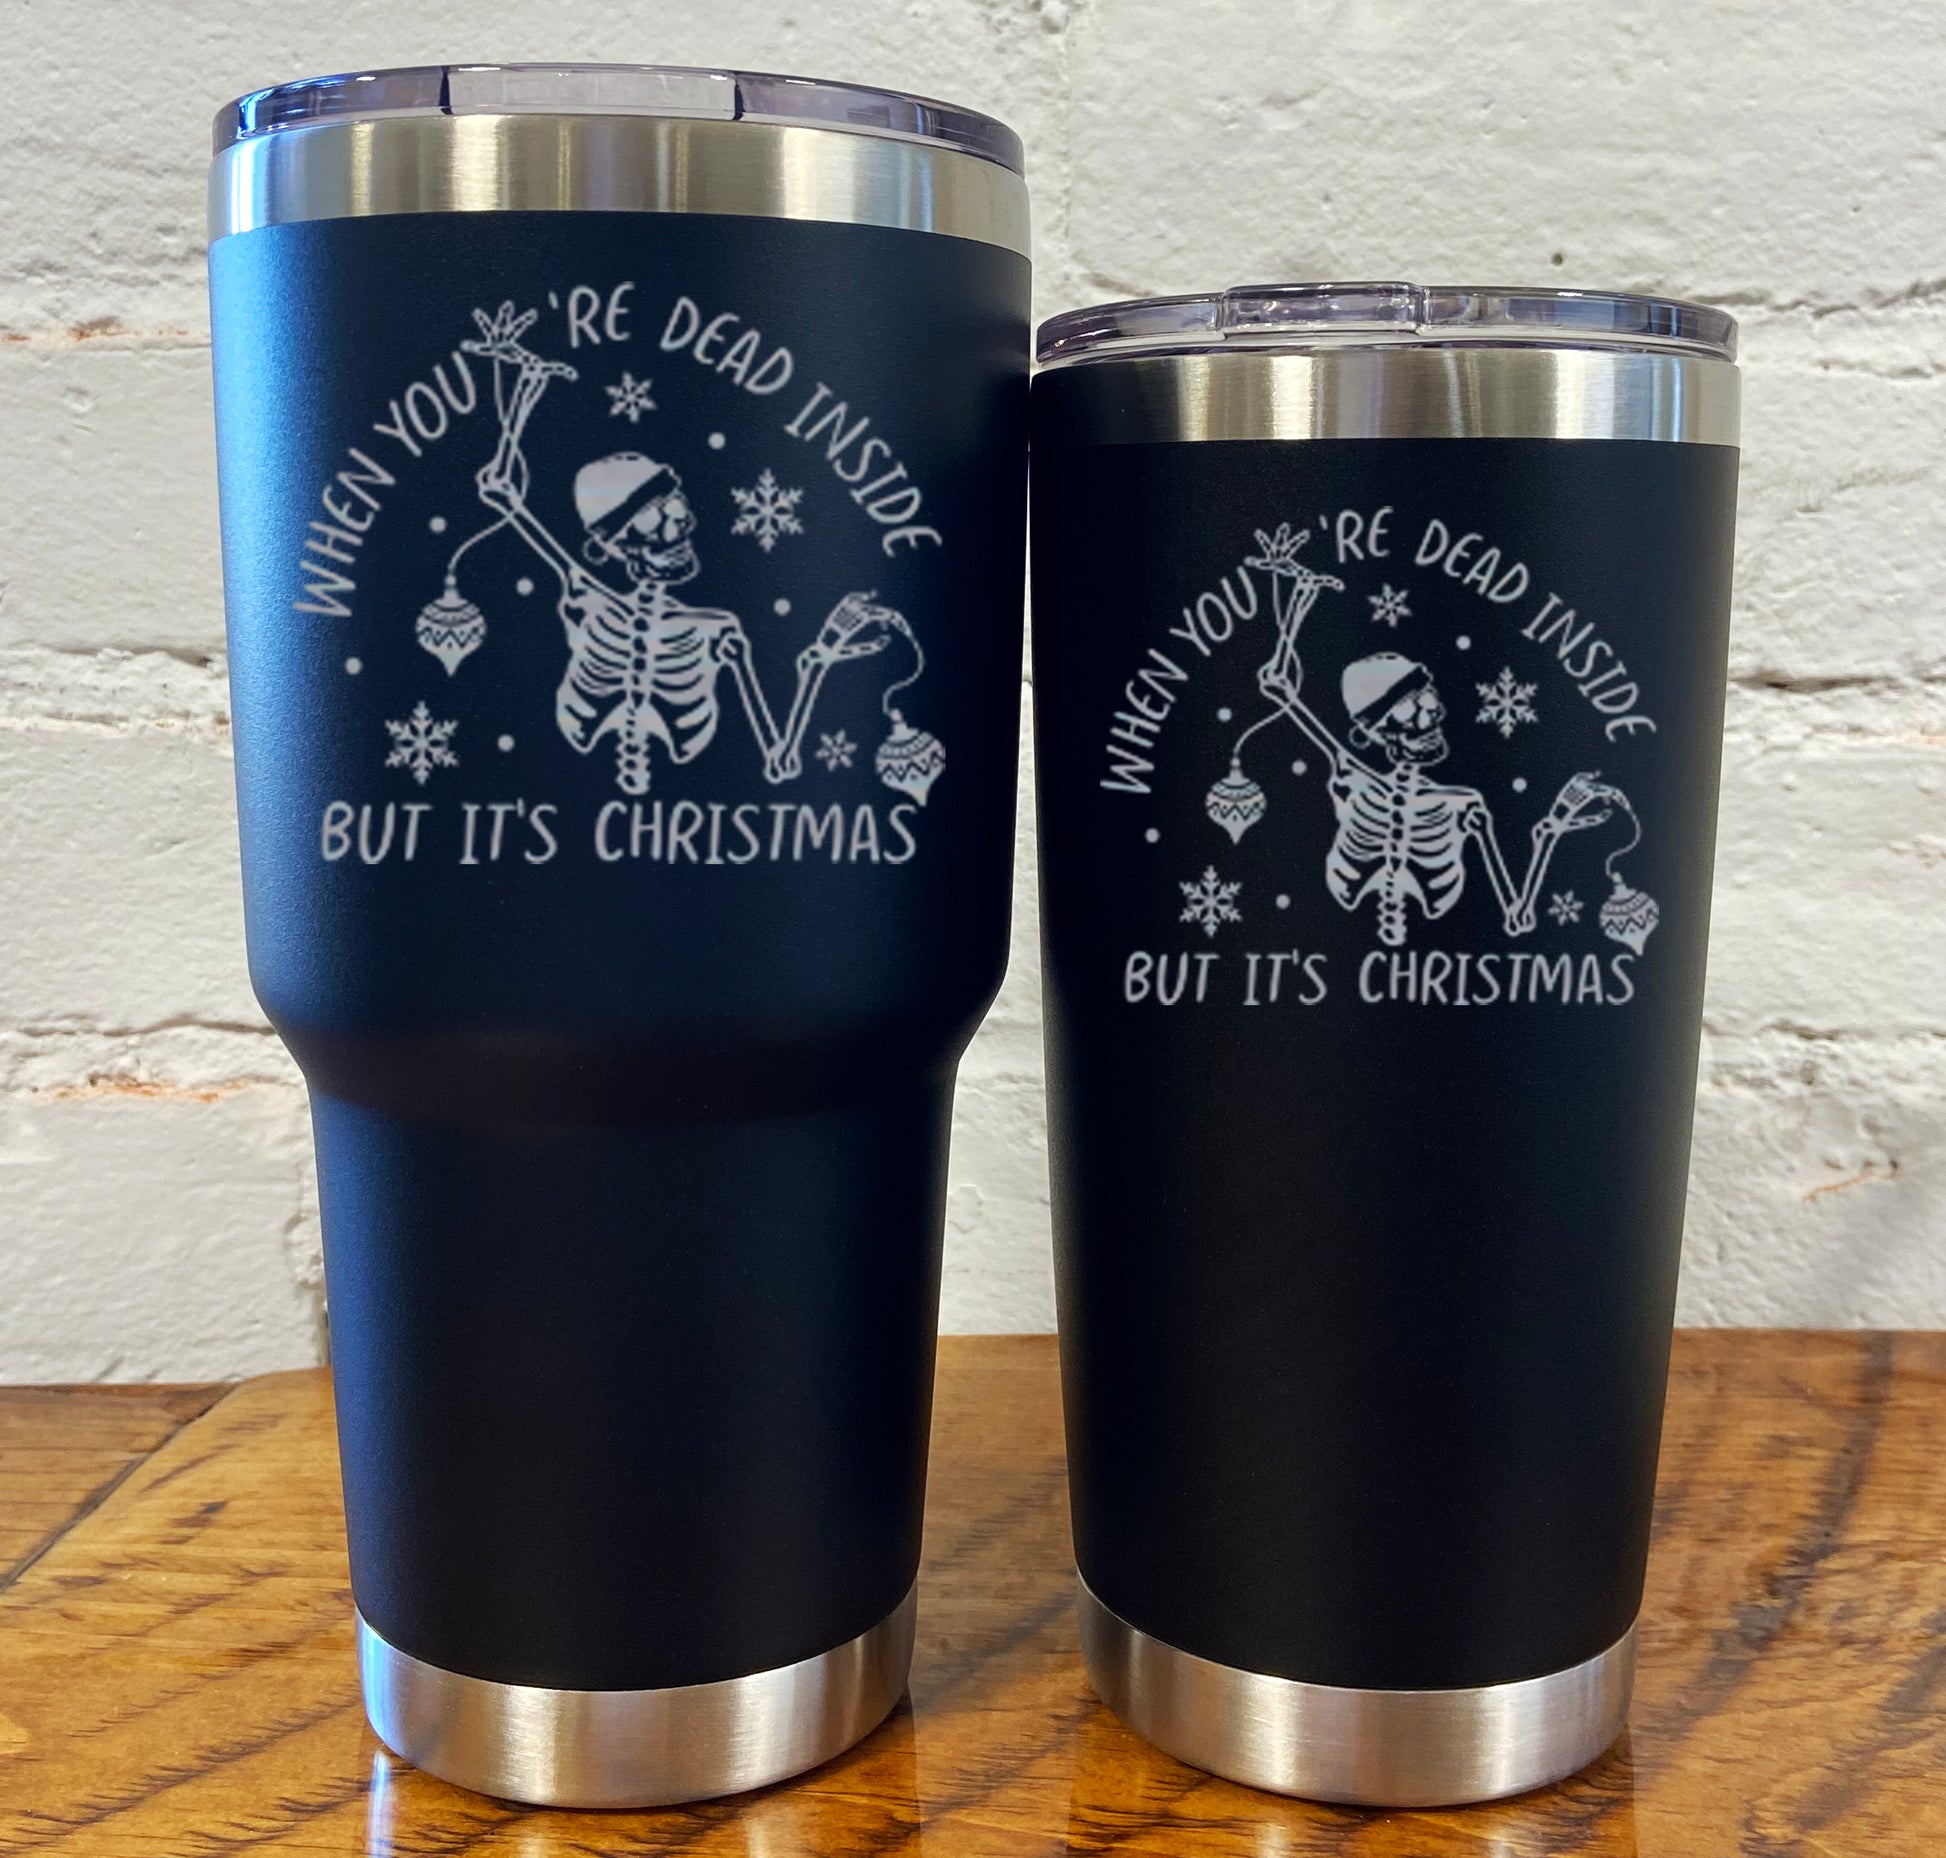 30oz and 20oz black tumblers with silver saying "when you're dead inside but it's christmas" with a santa hat skeleton holding ornaments 